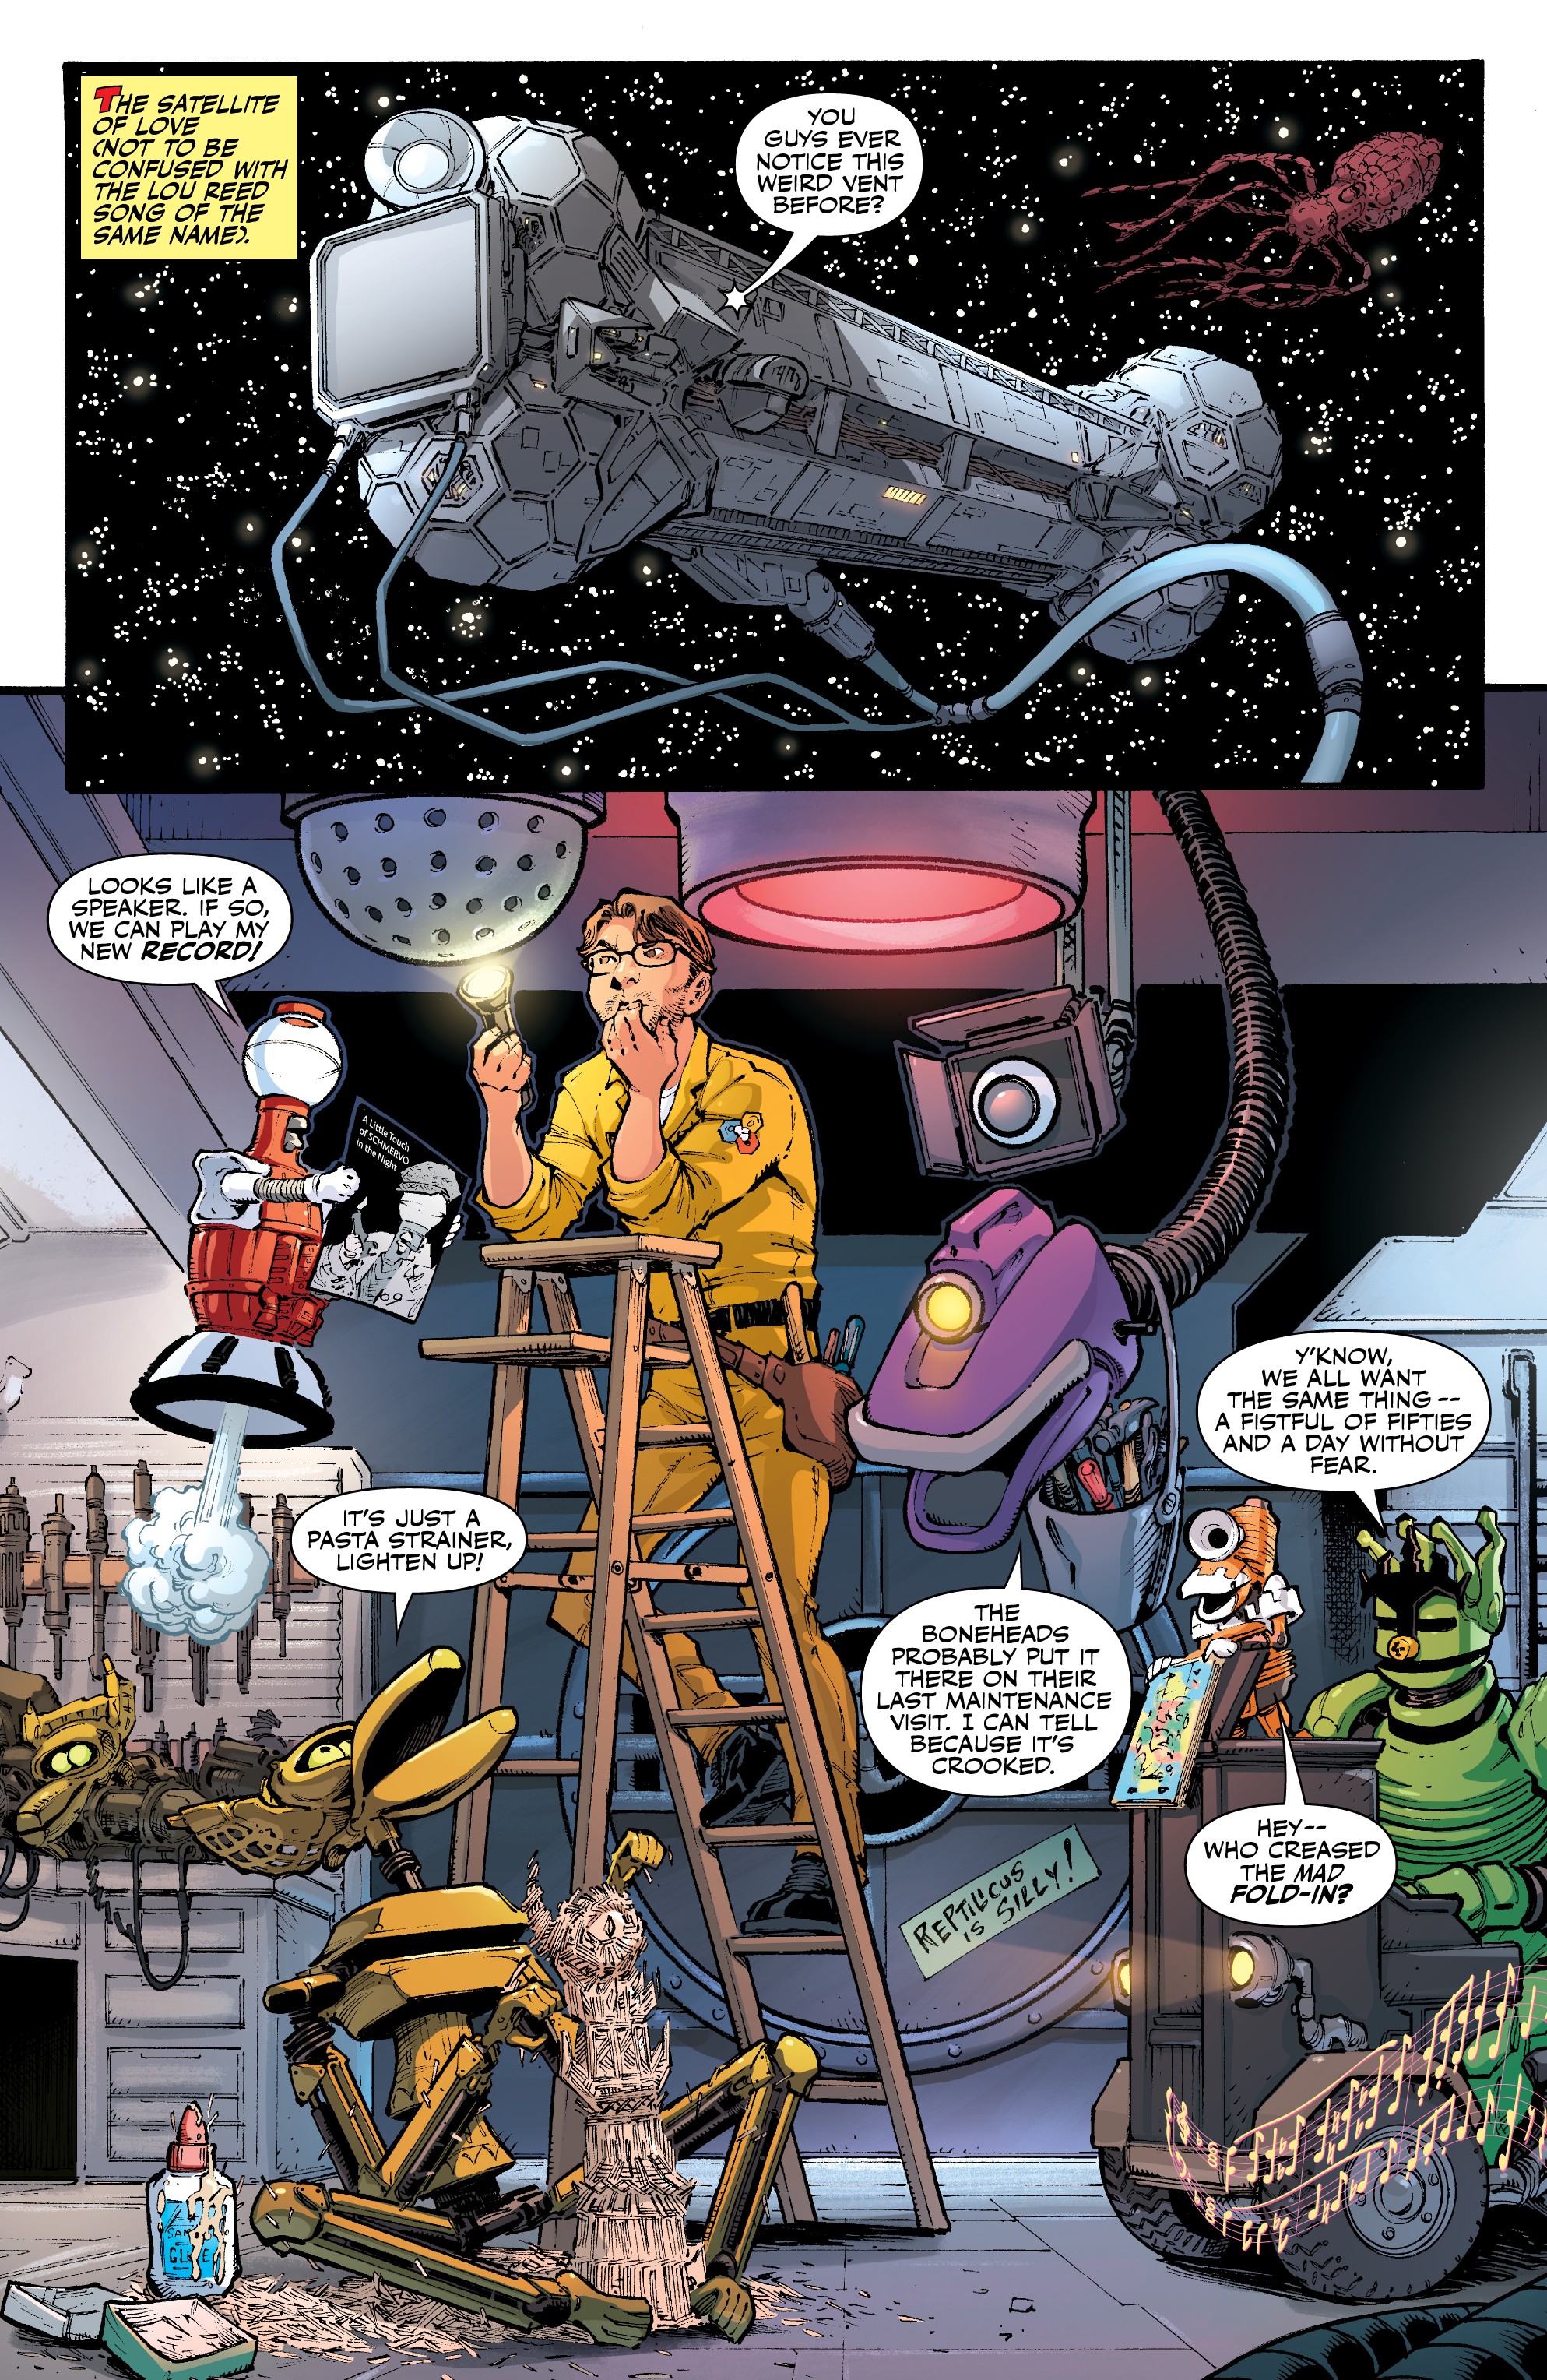 Mystery Science Theater 3000 (2018-): Chapter 1 - Page 4